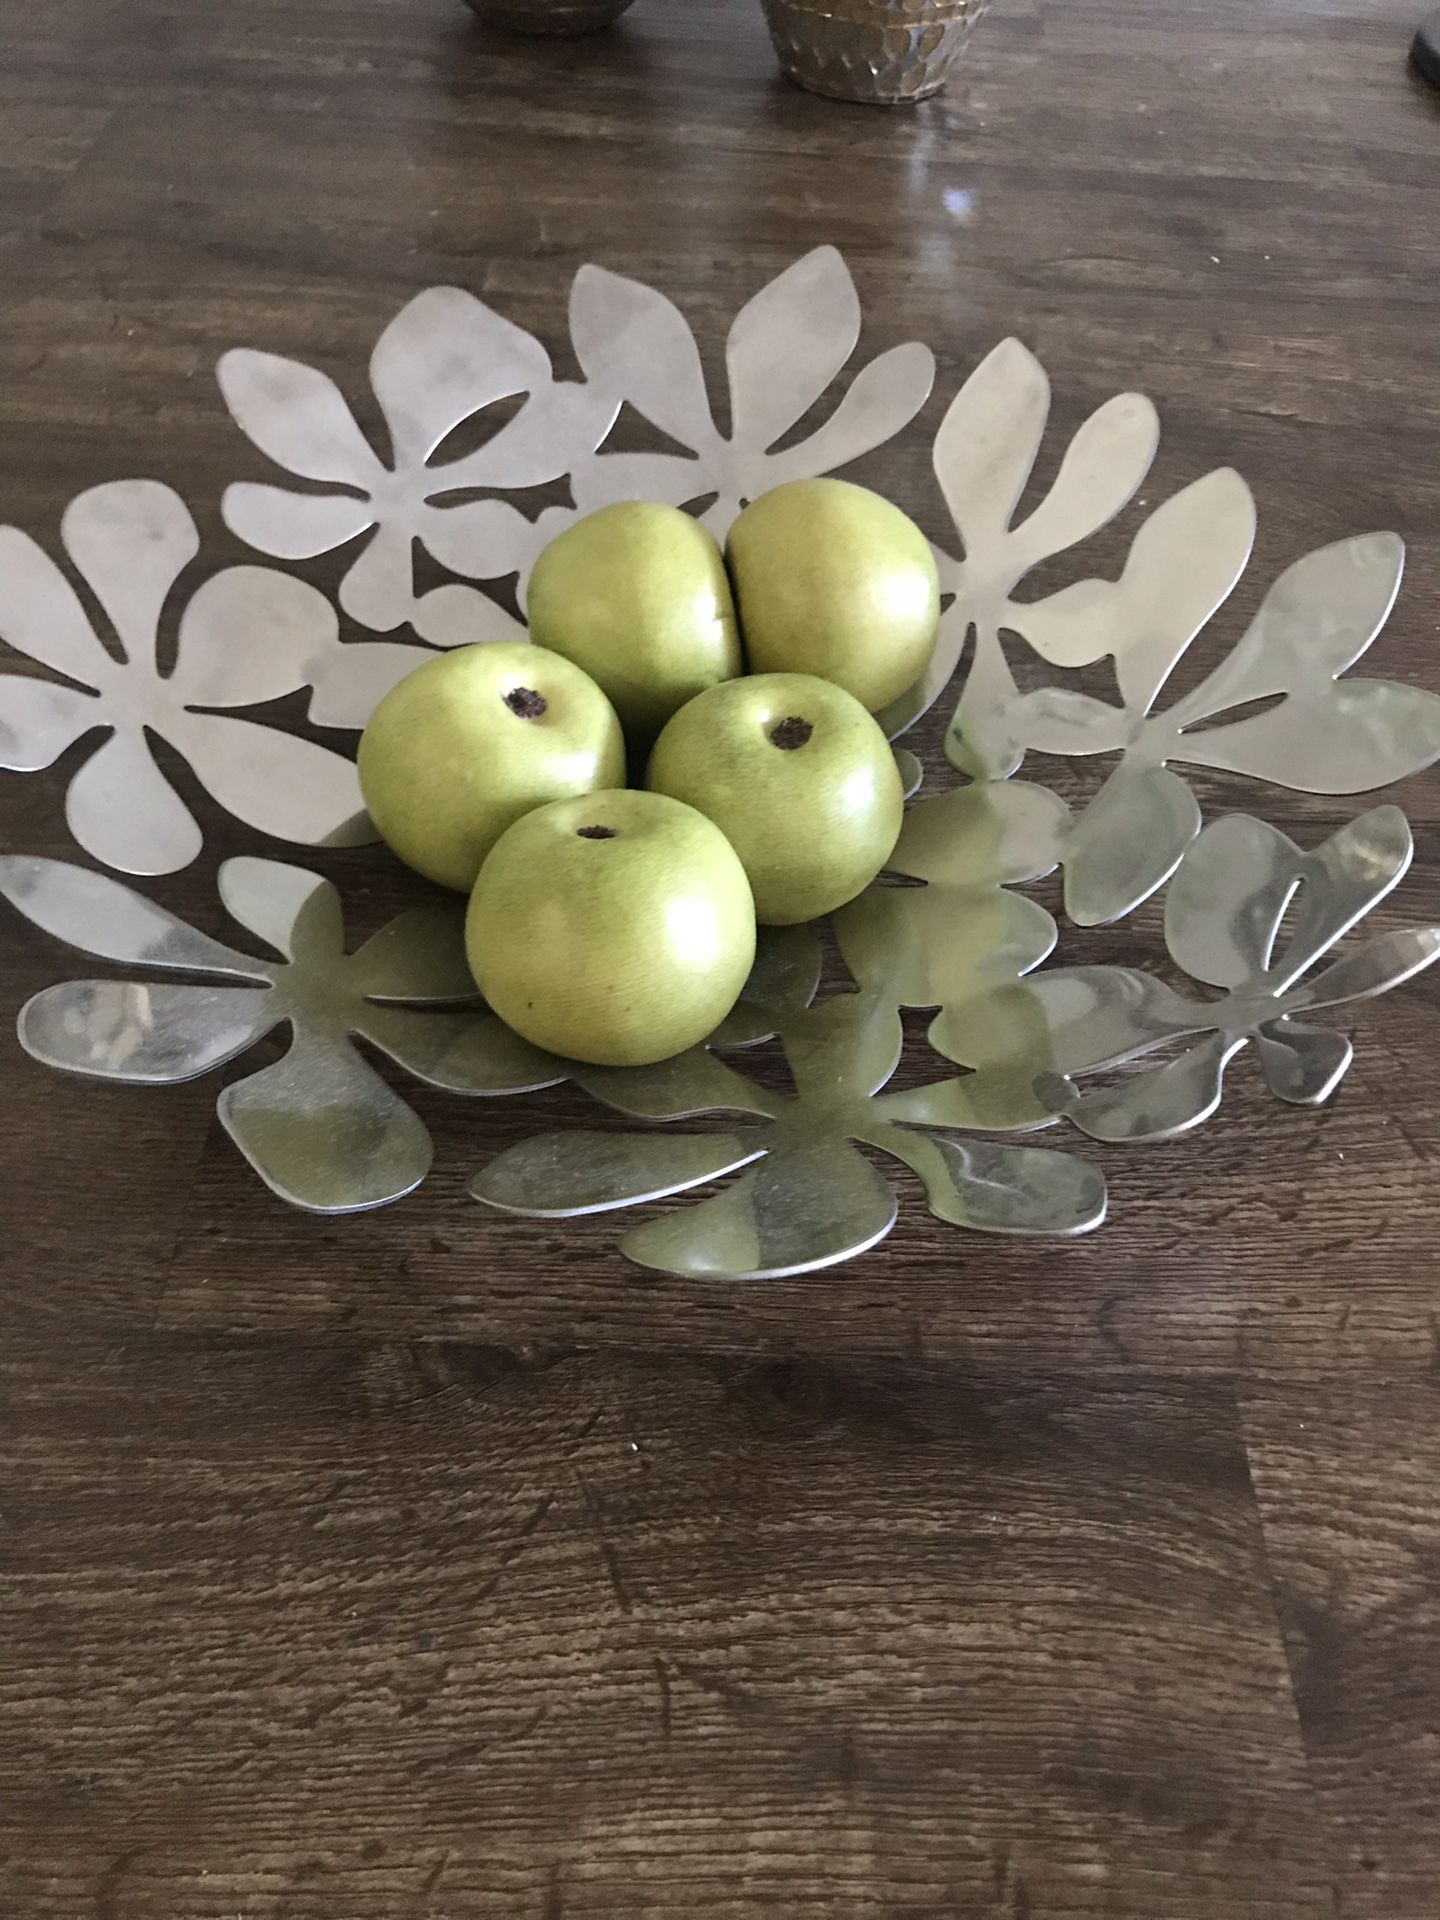 Ikea bowl with green apples, home decor